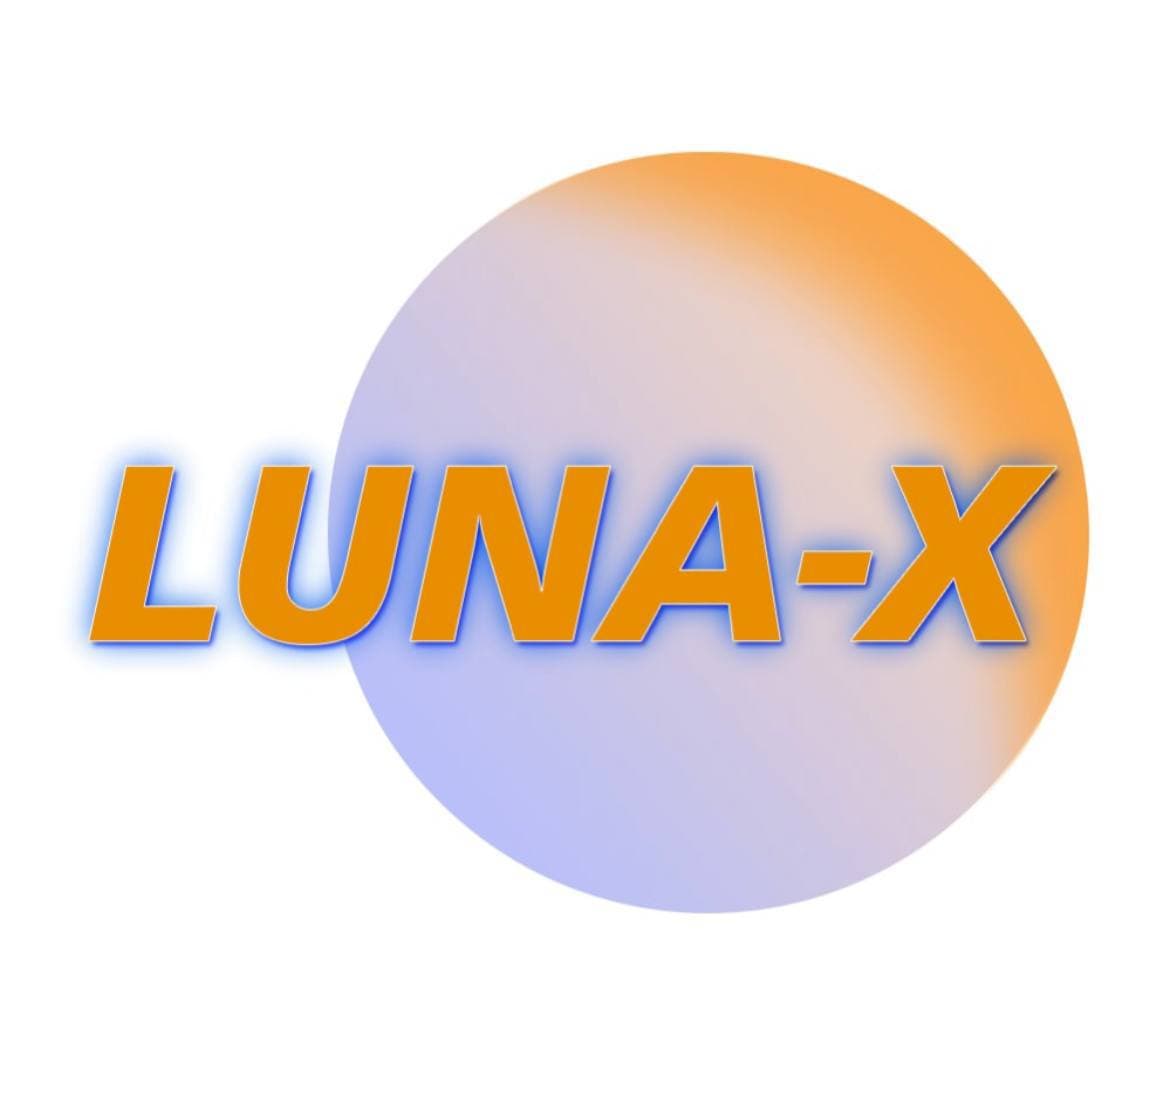 Luna-X ( LUNX ) token prices, charts and market cap overview.